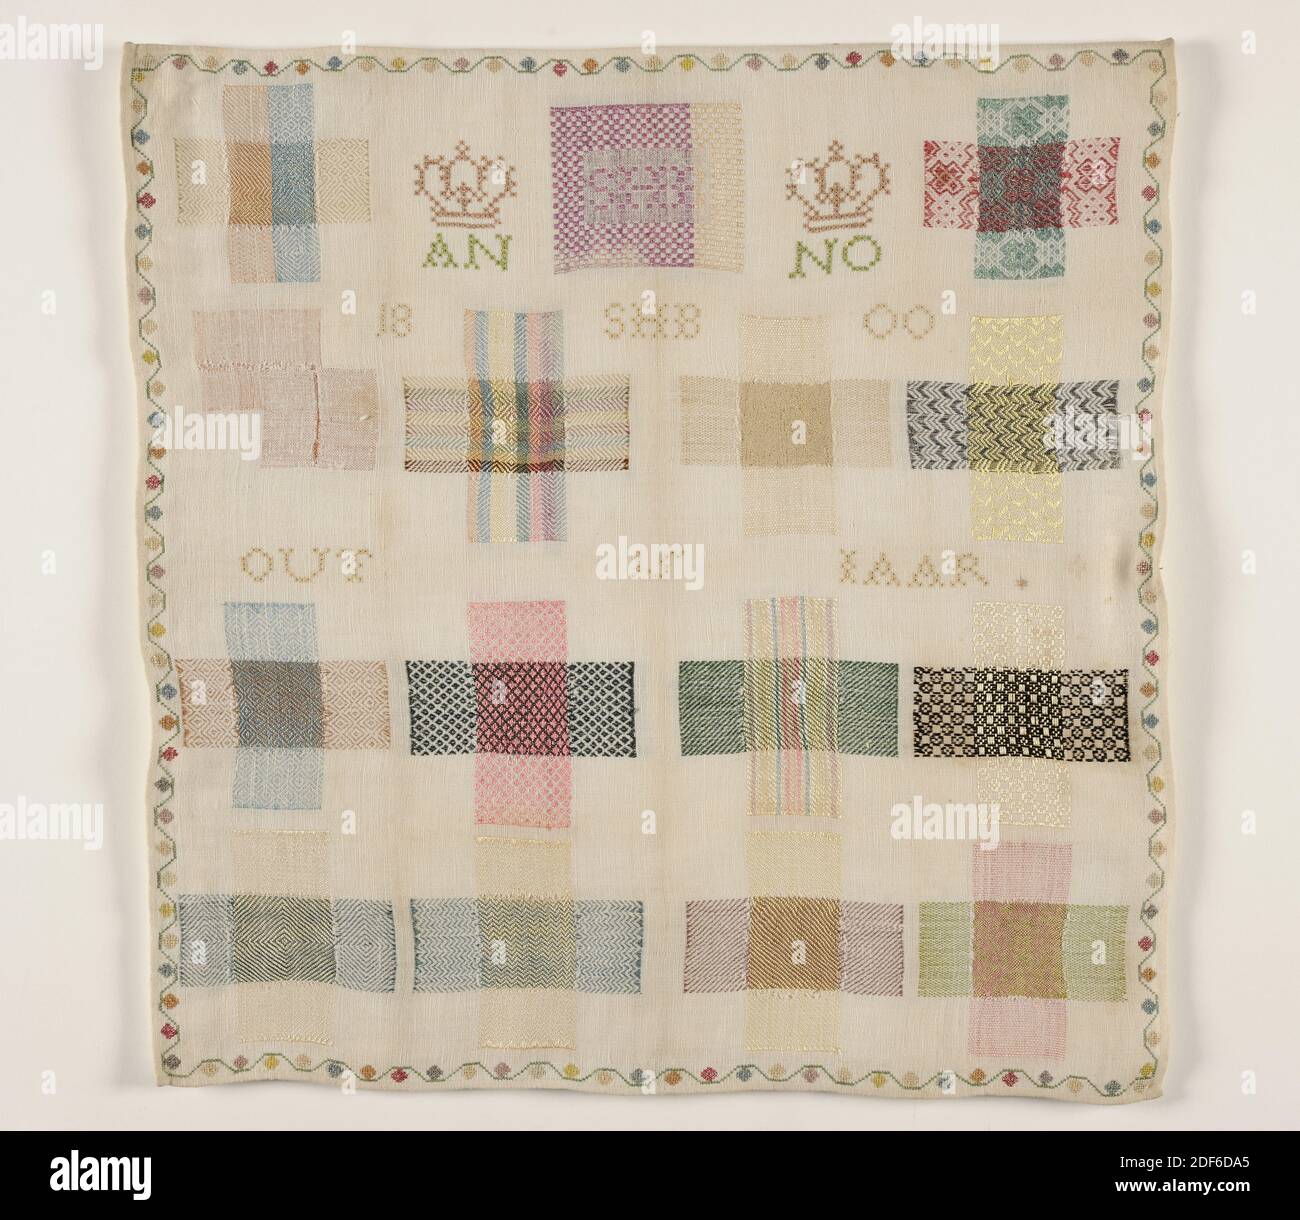 Stoplap Anonymous 1800 Cotton Silk Stoplap Made Of Cotton With Silk Thread In Various Colors At The Top Center A Doorstop With The Letters Shb And On The Left And Right A